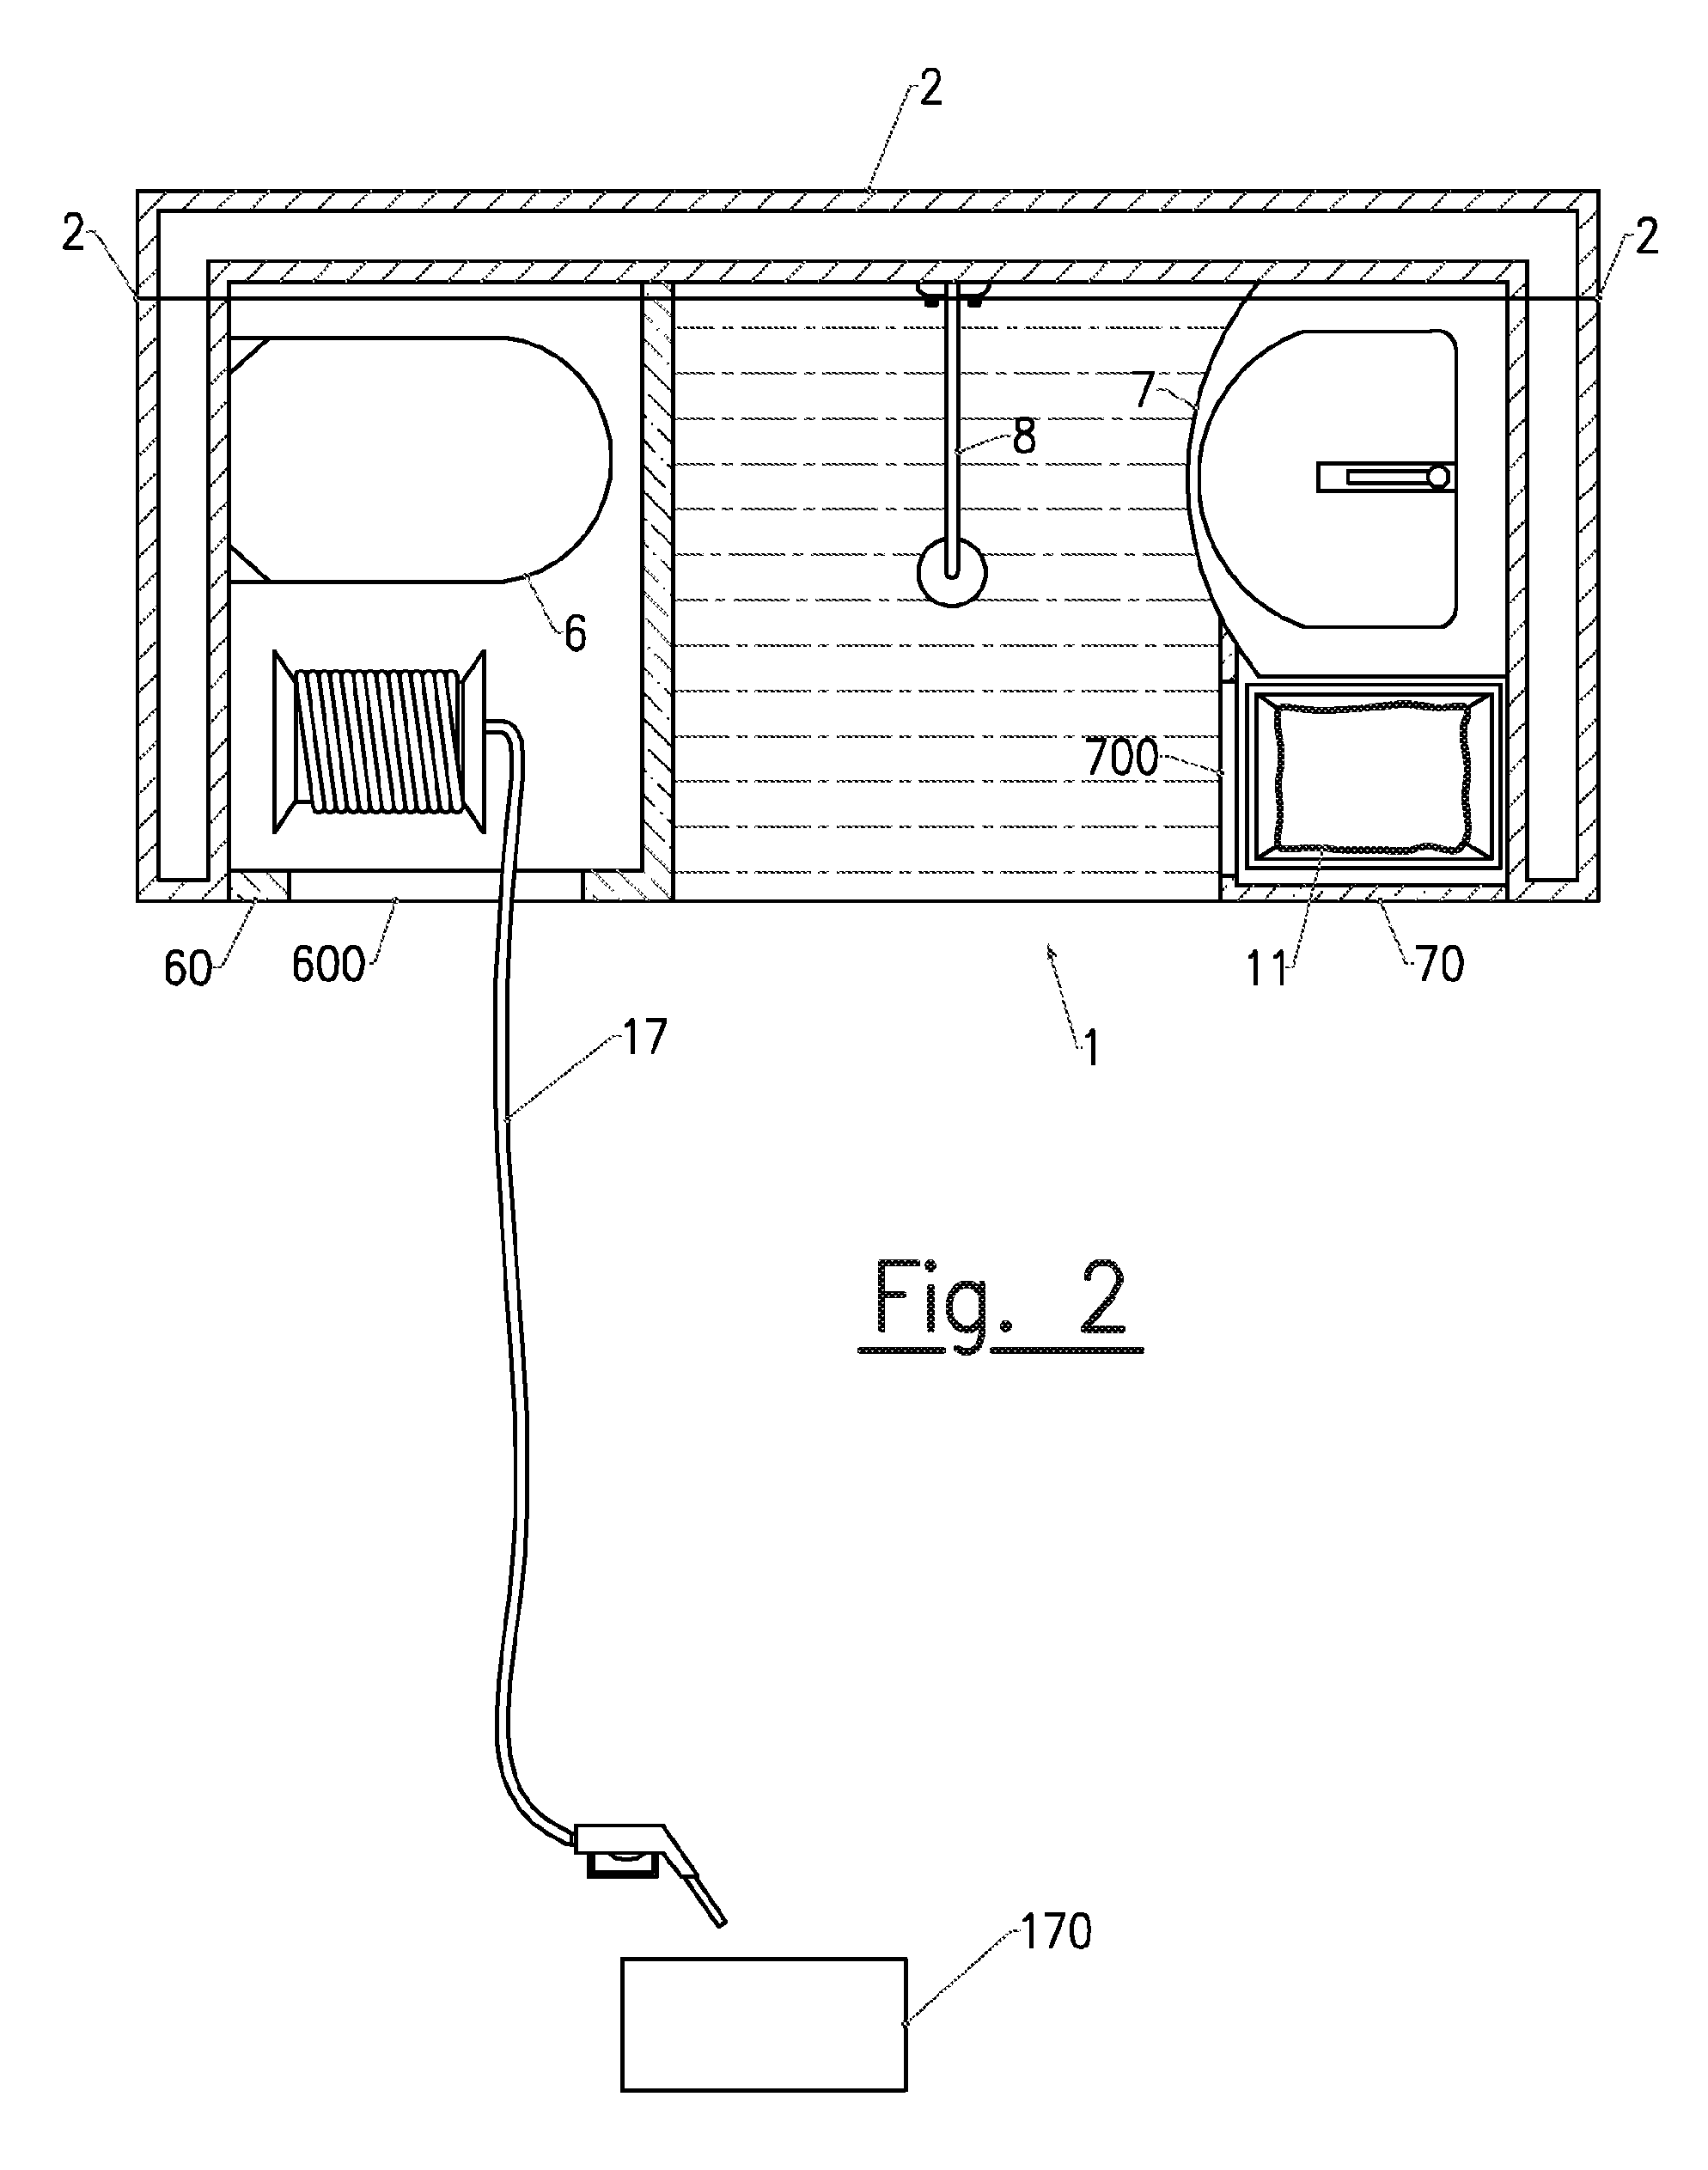 Self-contained bathroom